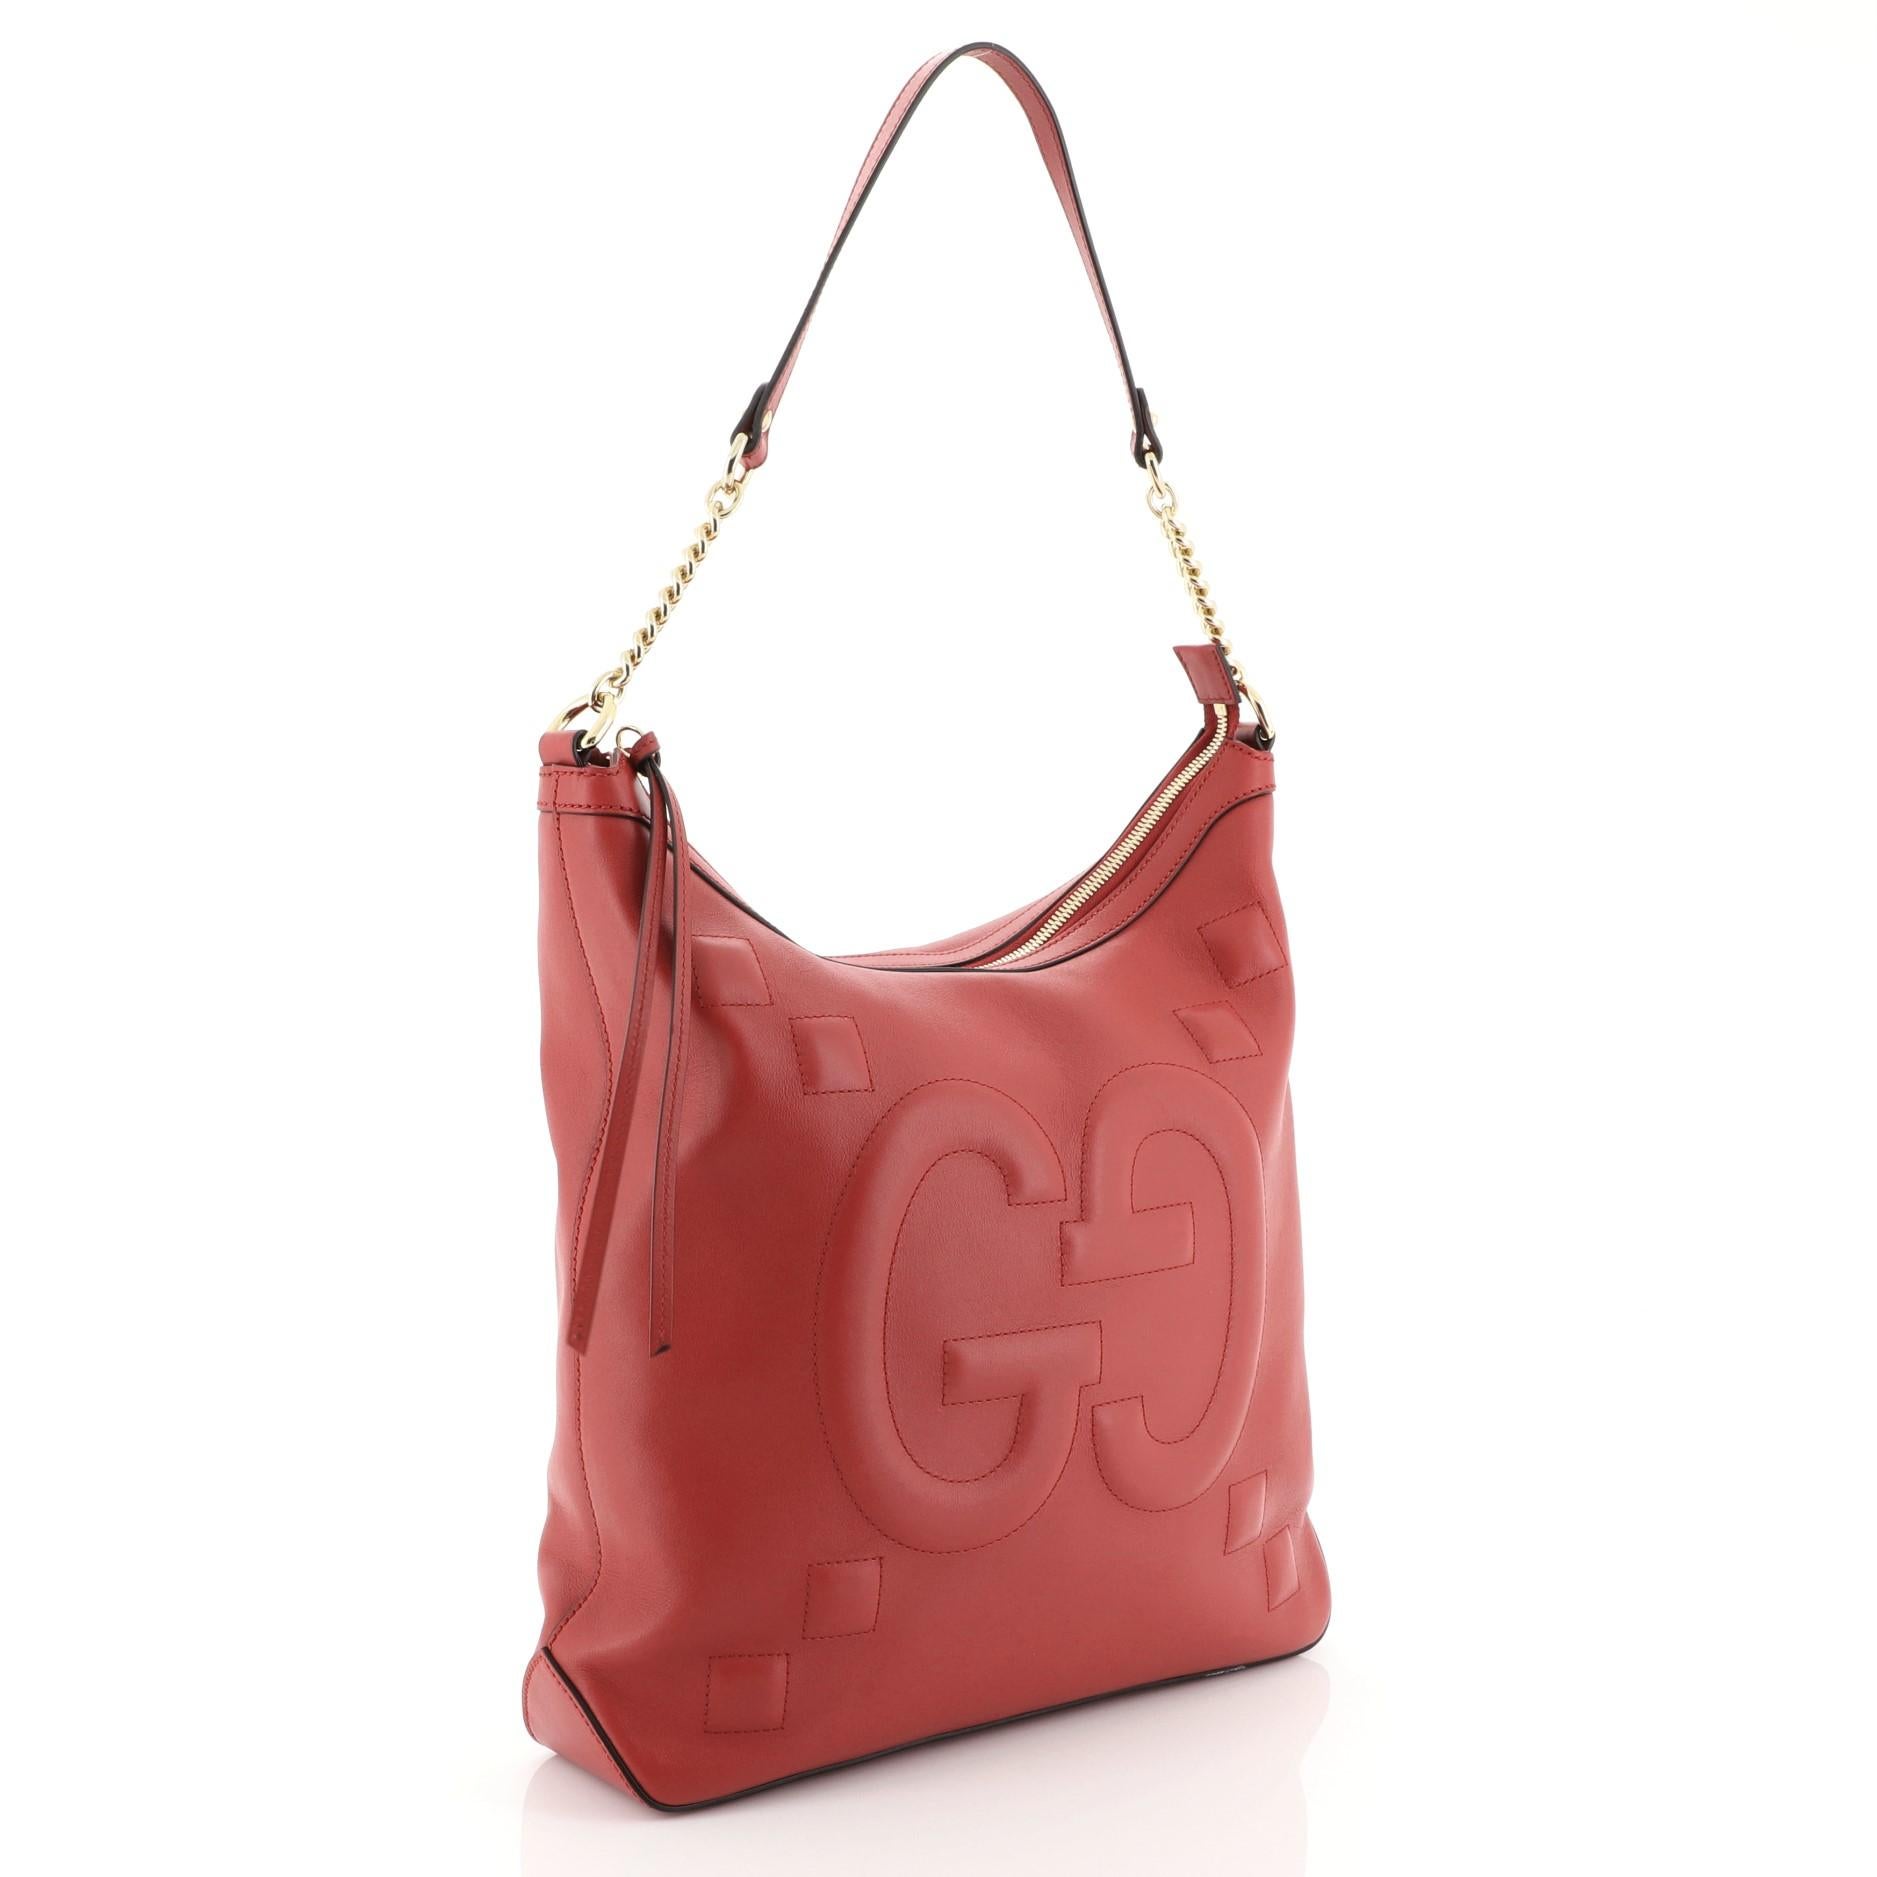 This Gucci Apollo Shoulder Bag GucciGhost Embossed Leather Large, crafted in red embossed leather, features chain link strap with leather pad and gold-tone hardware. Its zip closure opens to a neutral microfiber interior with zip and slip pockets.